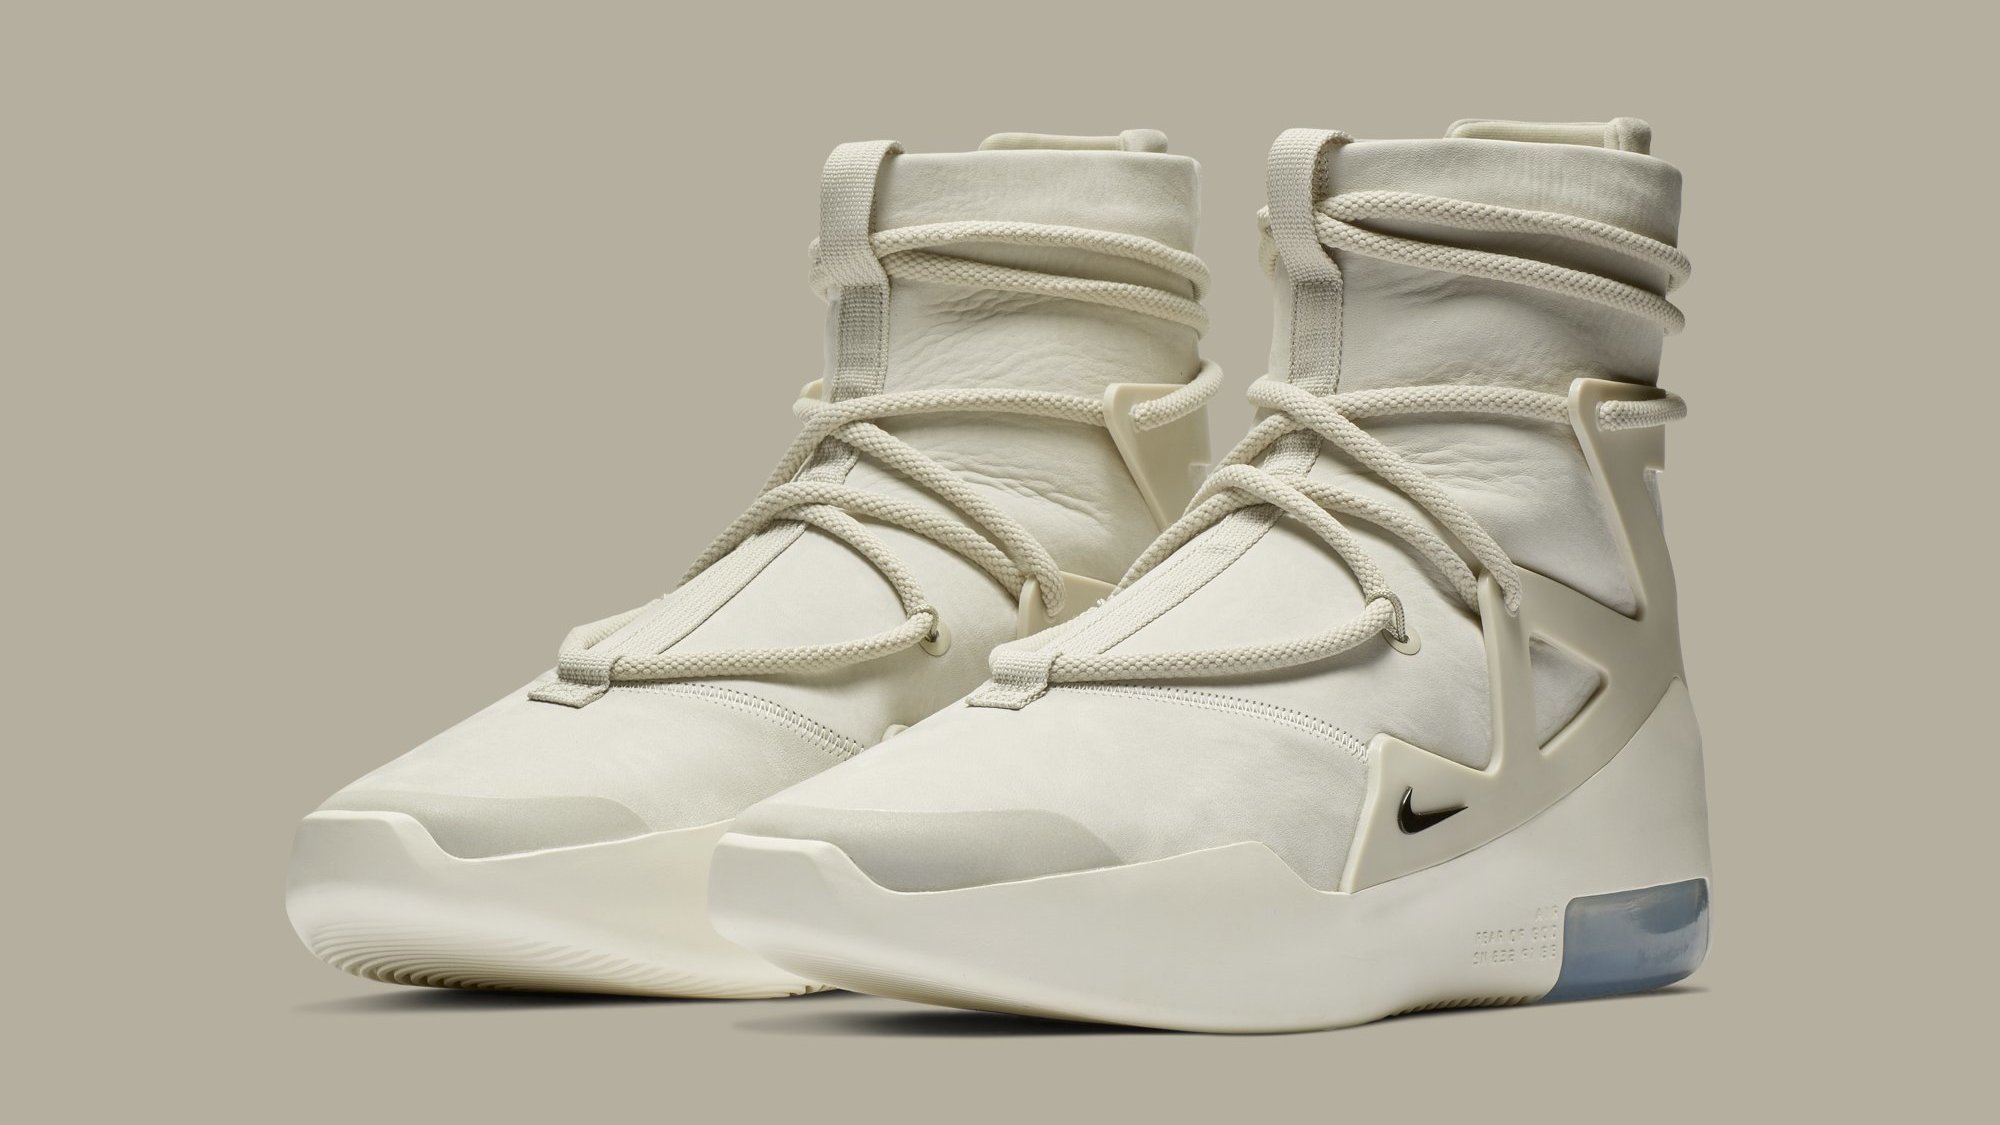 Jerry Lorenzo's Nike Air Fear of God 1 Releasing Soon | Complex